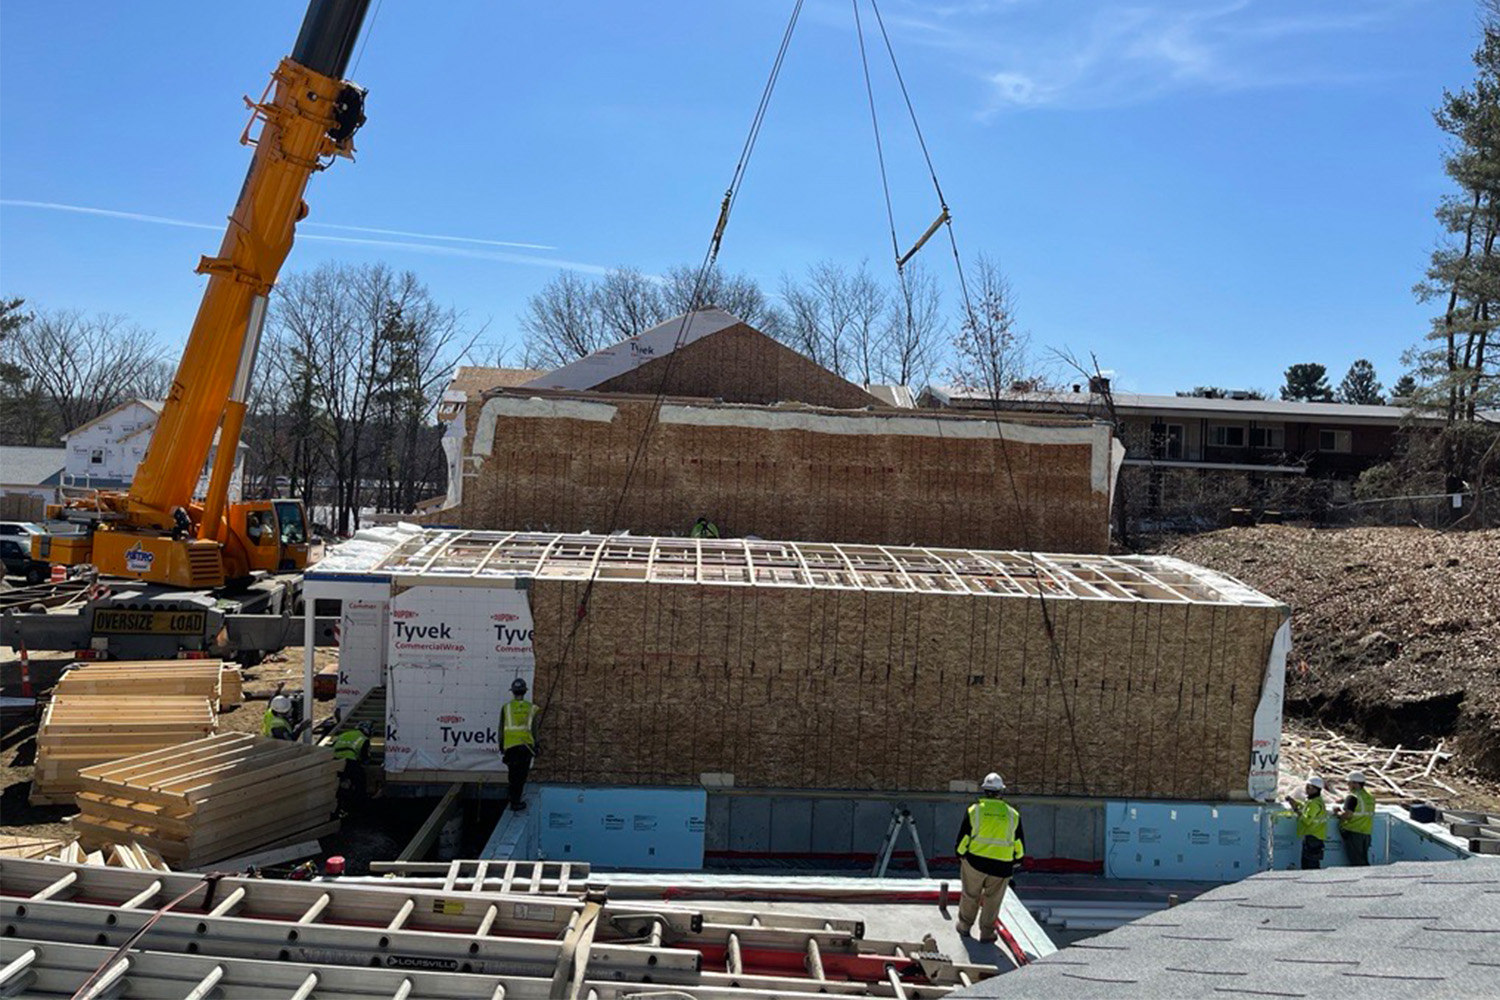 Modular box goes into place during topping off at Natick project site